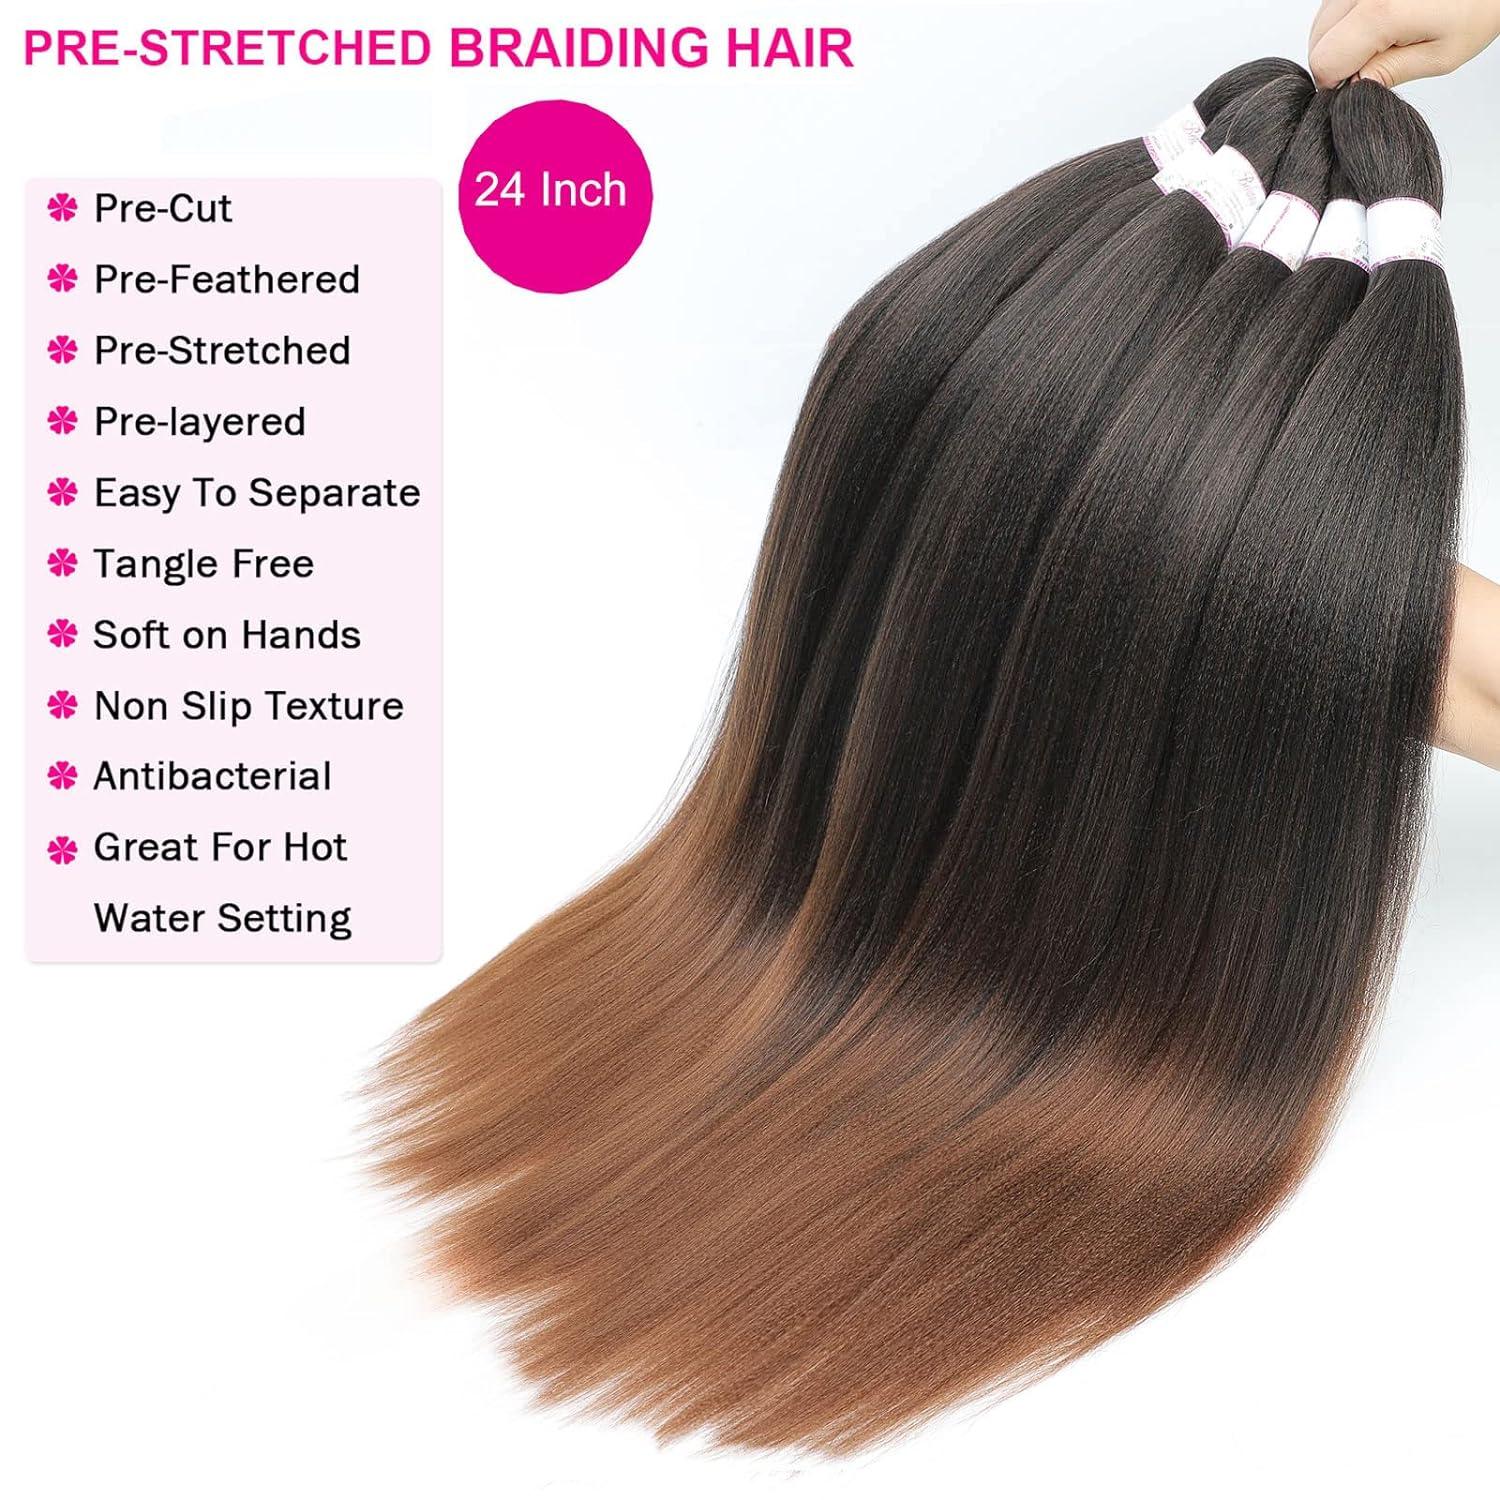 BEFUNNY Braiding Hair Pre Stretched Braiding Hair 24 Inch 8 Packs Ombre  Prestretched Hair For Crochet Box Braids Professional Itch Free Synthetic  Hair Extension For Women Yaki Texture(24 T1B/30) 24 Inch (Pack of 8) T